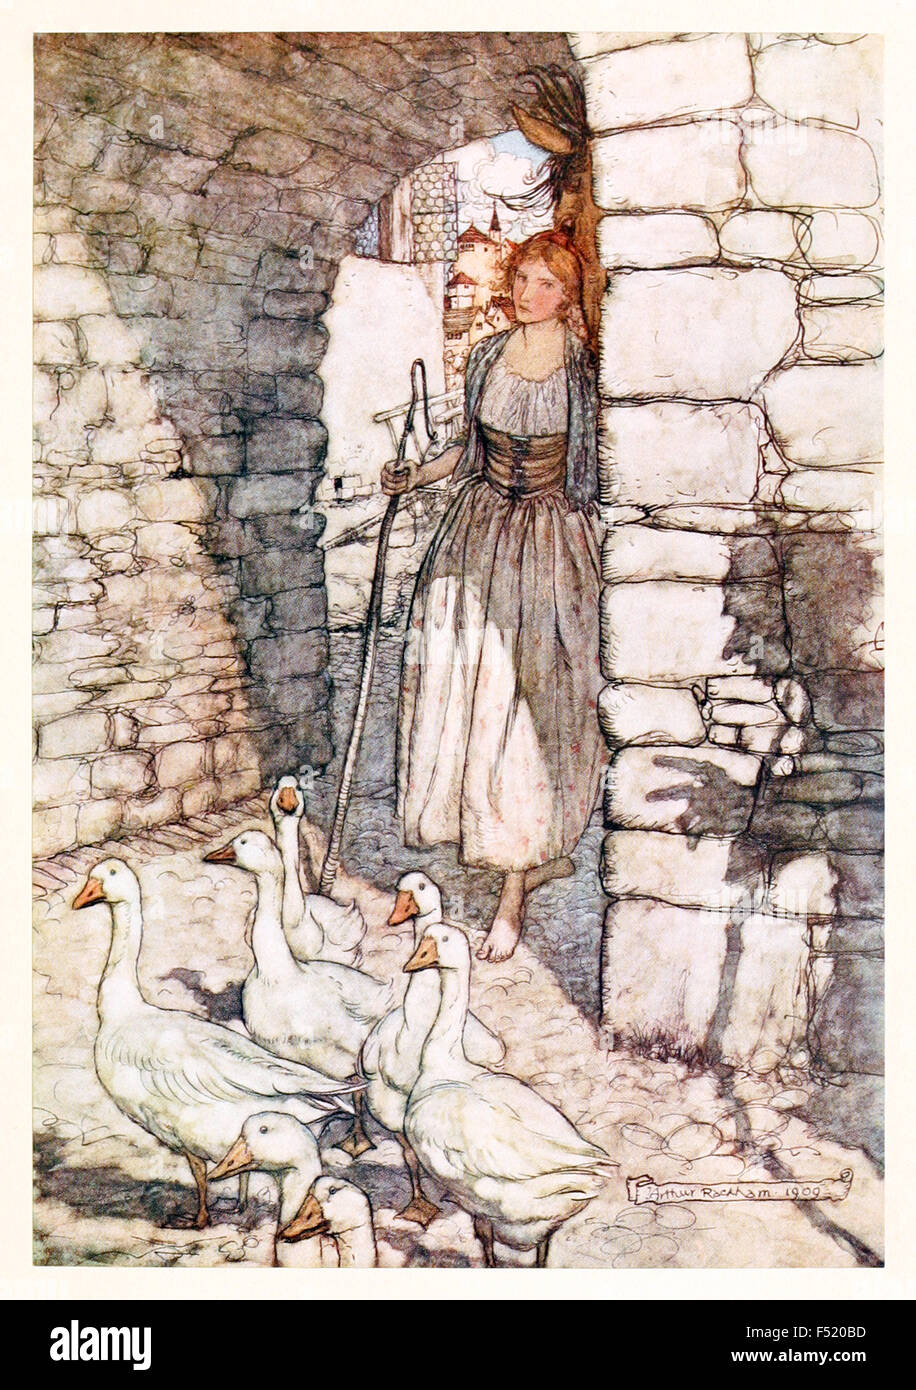 'Alas! dear Falada, there thou hangest.' from 'The Goosegirl' in ‘The Fairy Tales of the Brother's Grimm', illustration by Arthur Rackham (1867-1939). See description for more information. Stock Photo